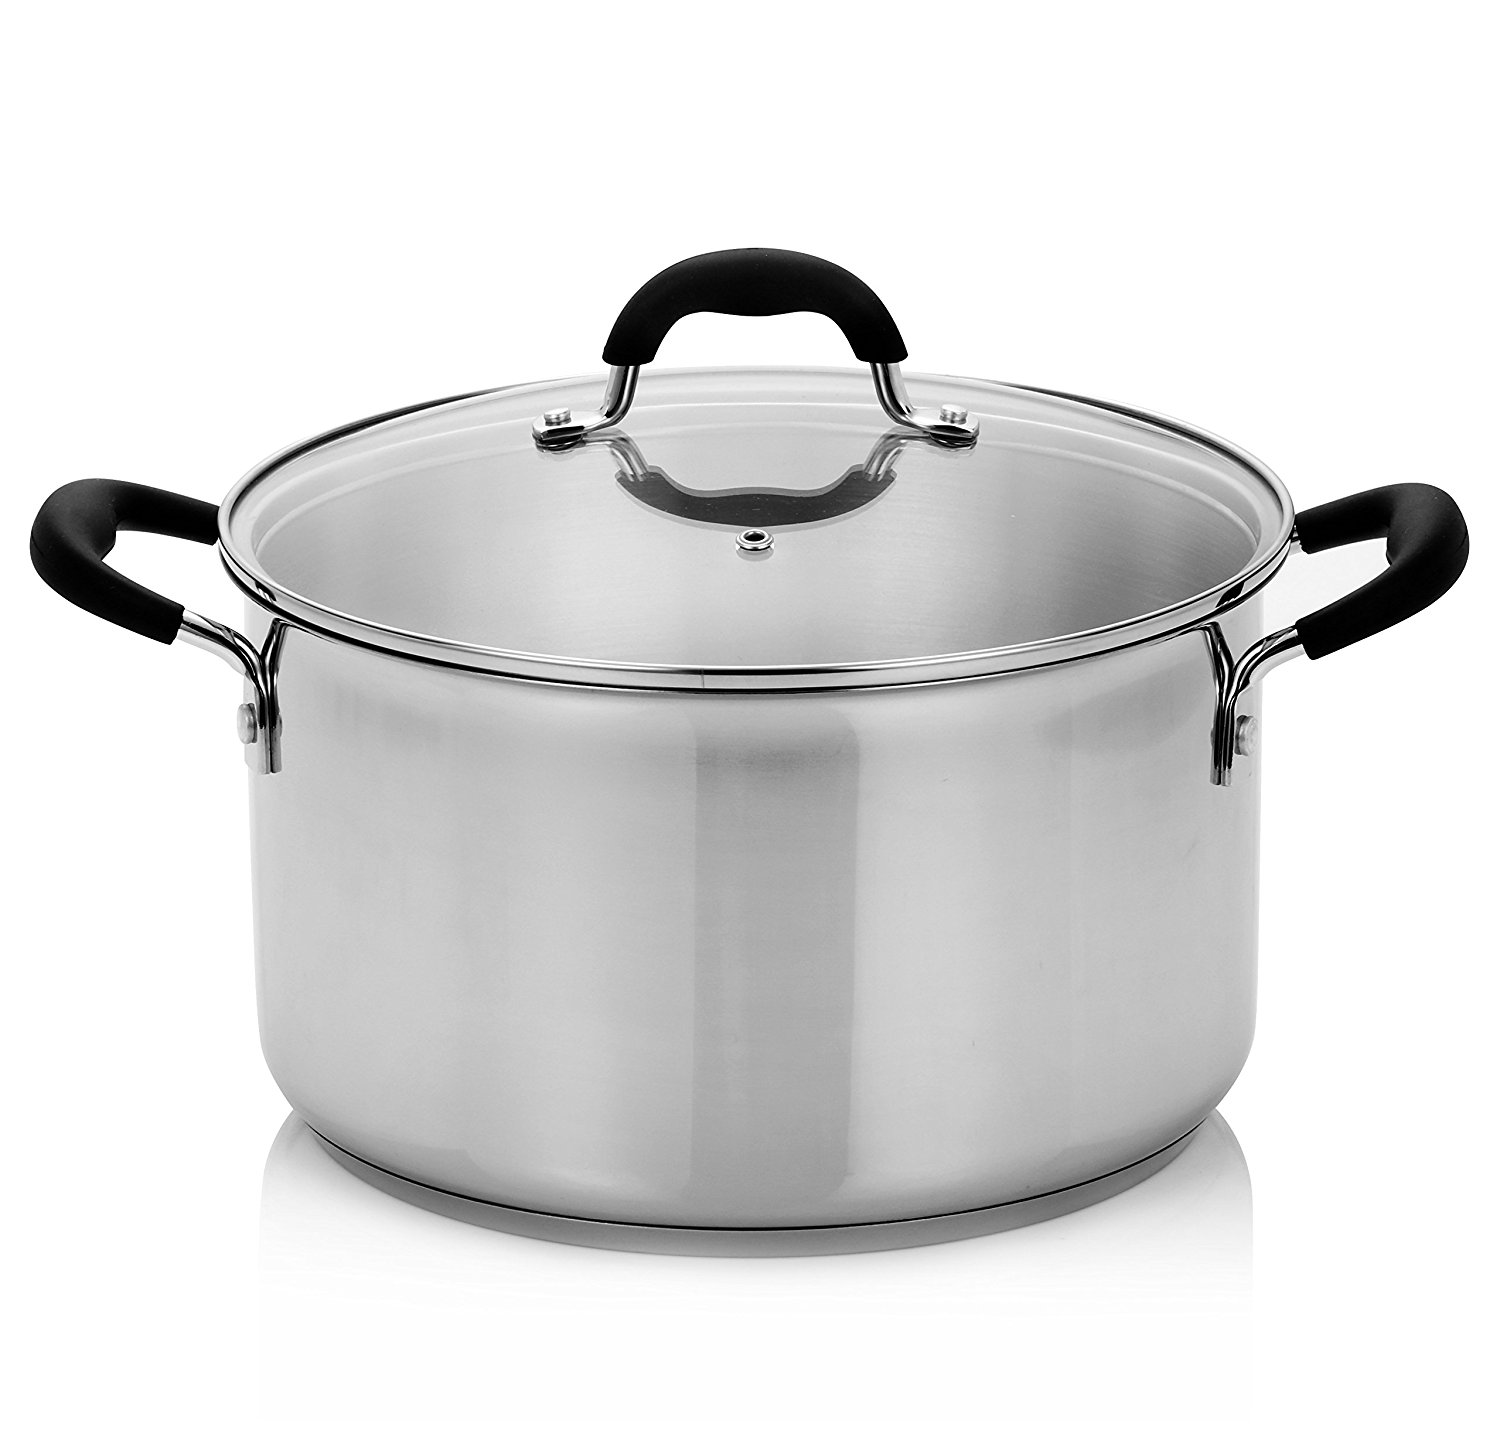 Finnhomy Approved AISI304 18 10 Stainless Steel 8 Quart Stock Pot With Cover 3 Layers BaseInduction Base Safe Metallic 